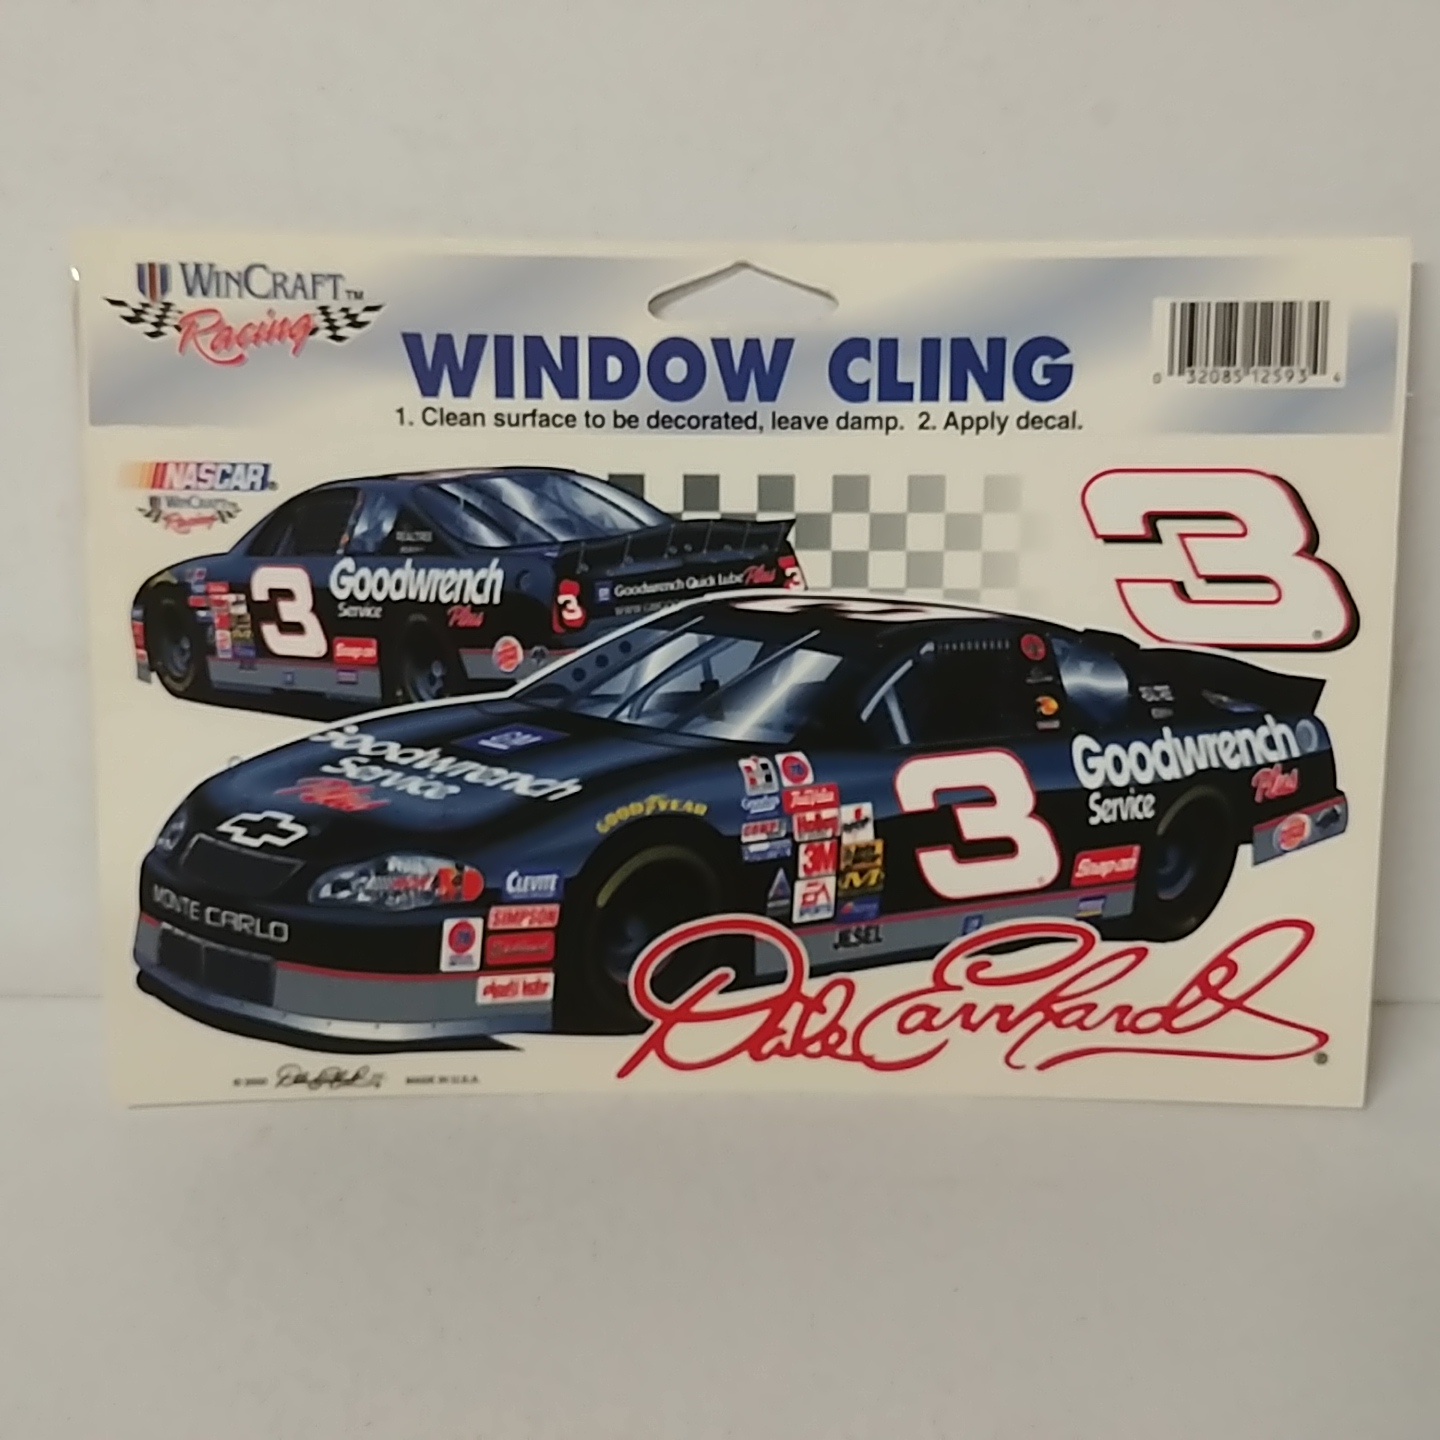 2000 Dale Earnhardt Goodwrench window cling